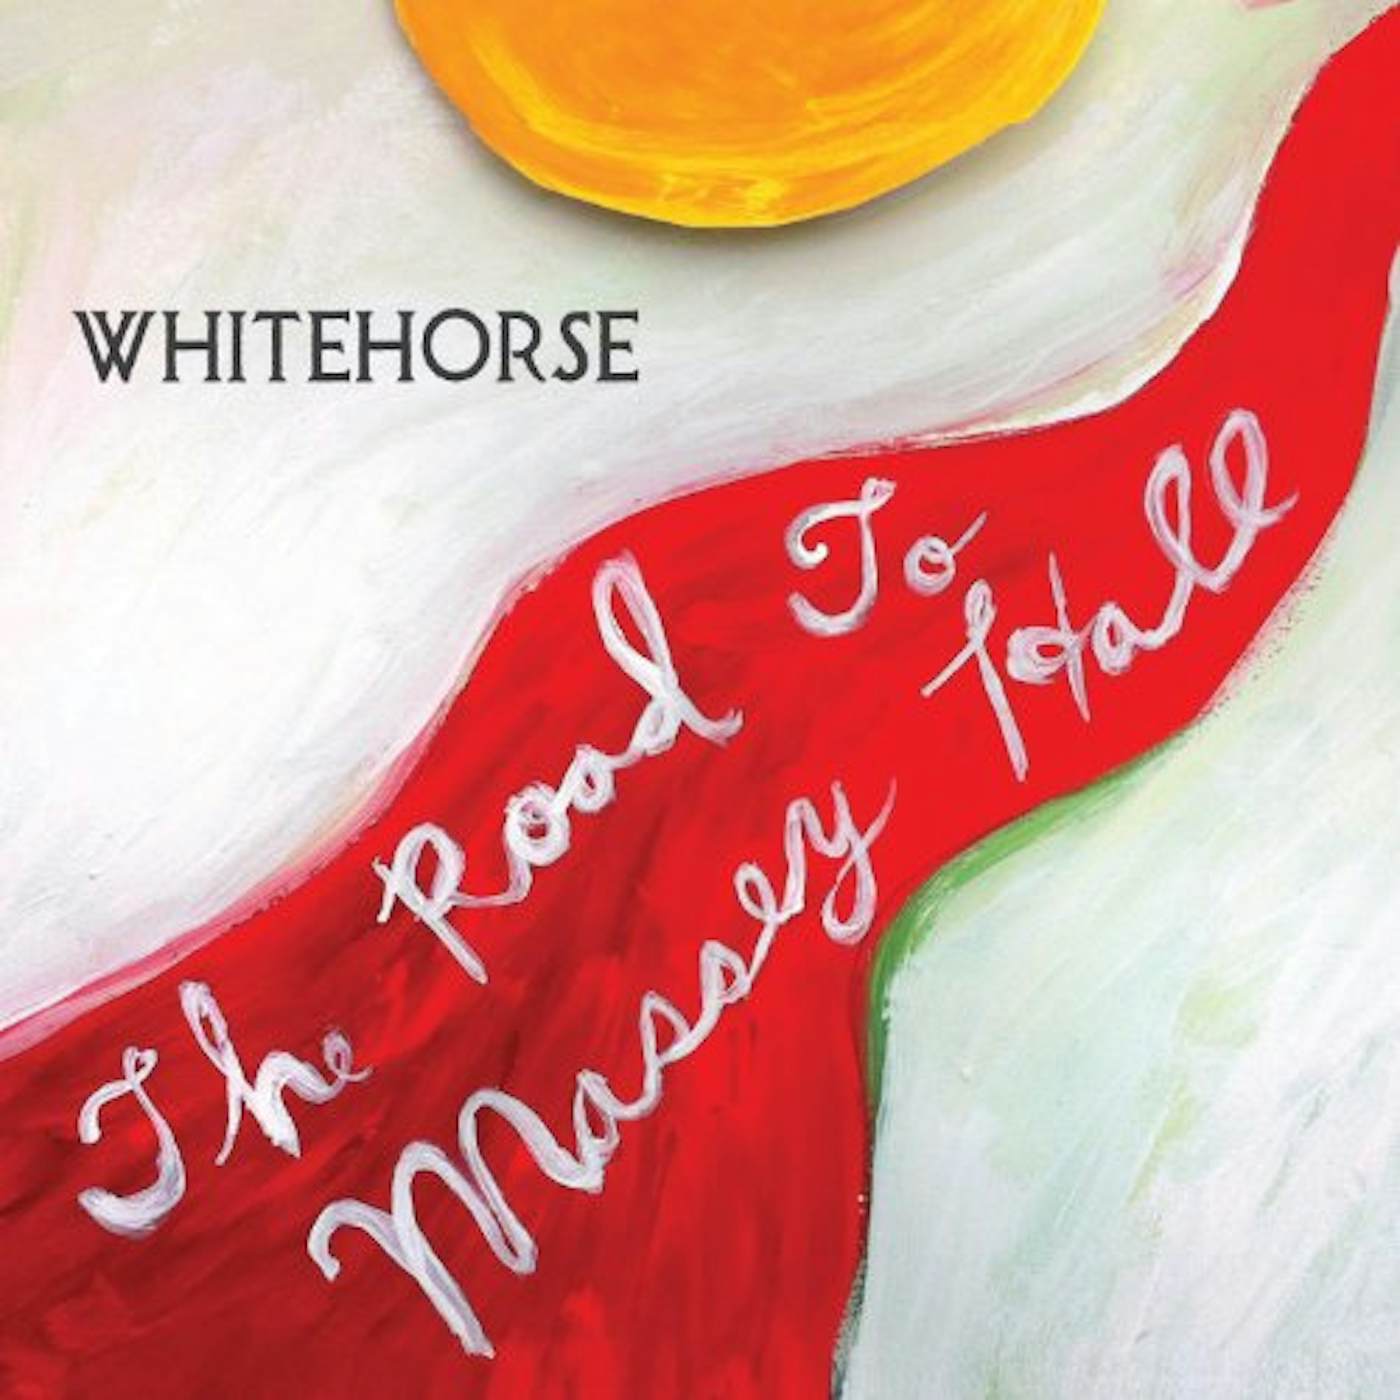 Whitehorse ROAD TO MASSEY HALL CD